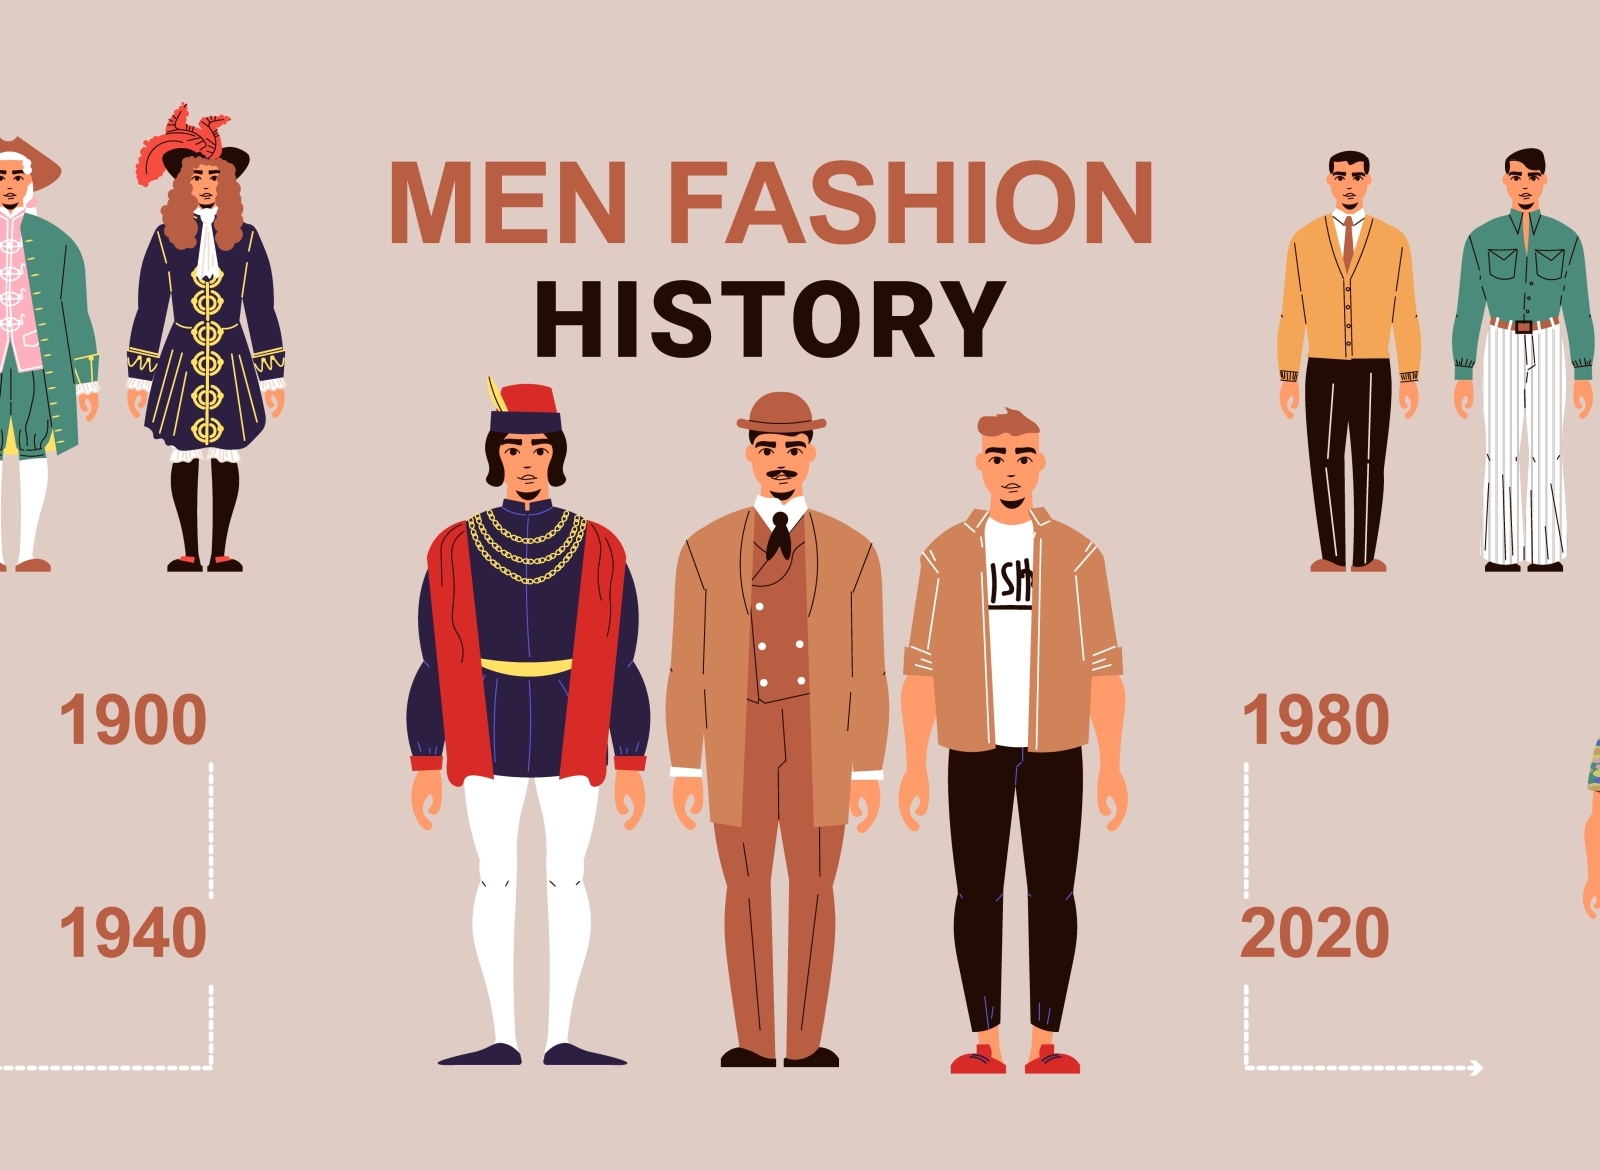 Men fashion history background by Macrovector on Dribbble